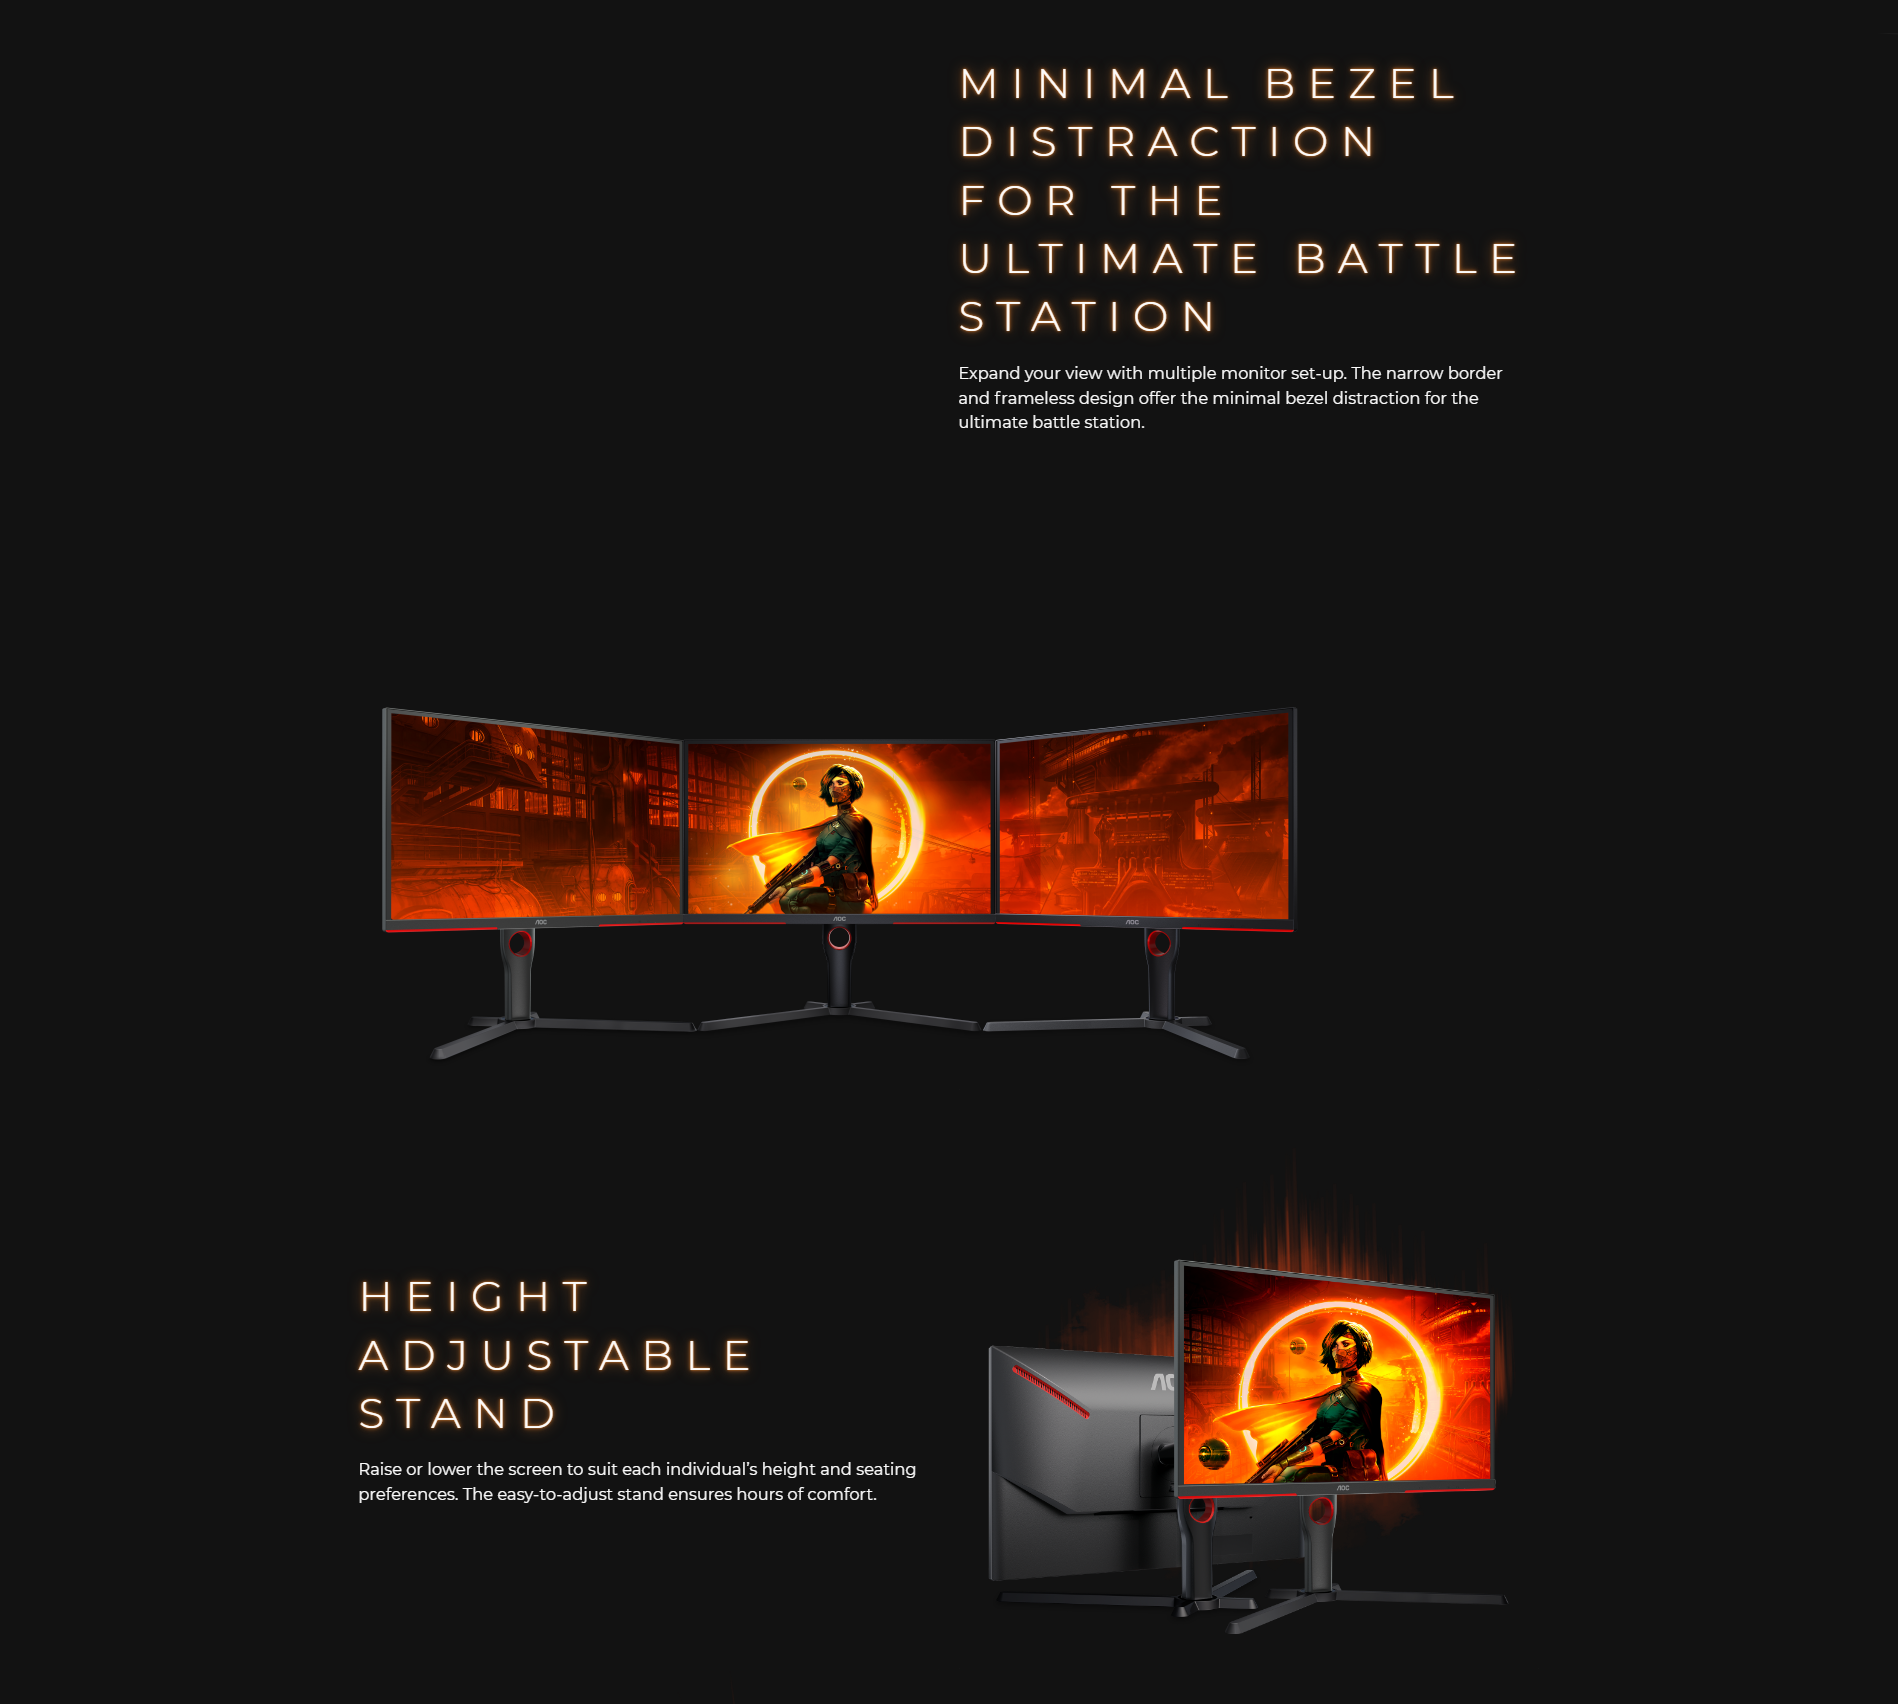 A large marketing image providing additional information about the product AOC Gaming 25G3ZM - 24.5" FHD 240Hz VA Monitor - Additional alt info not provided